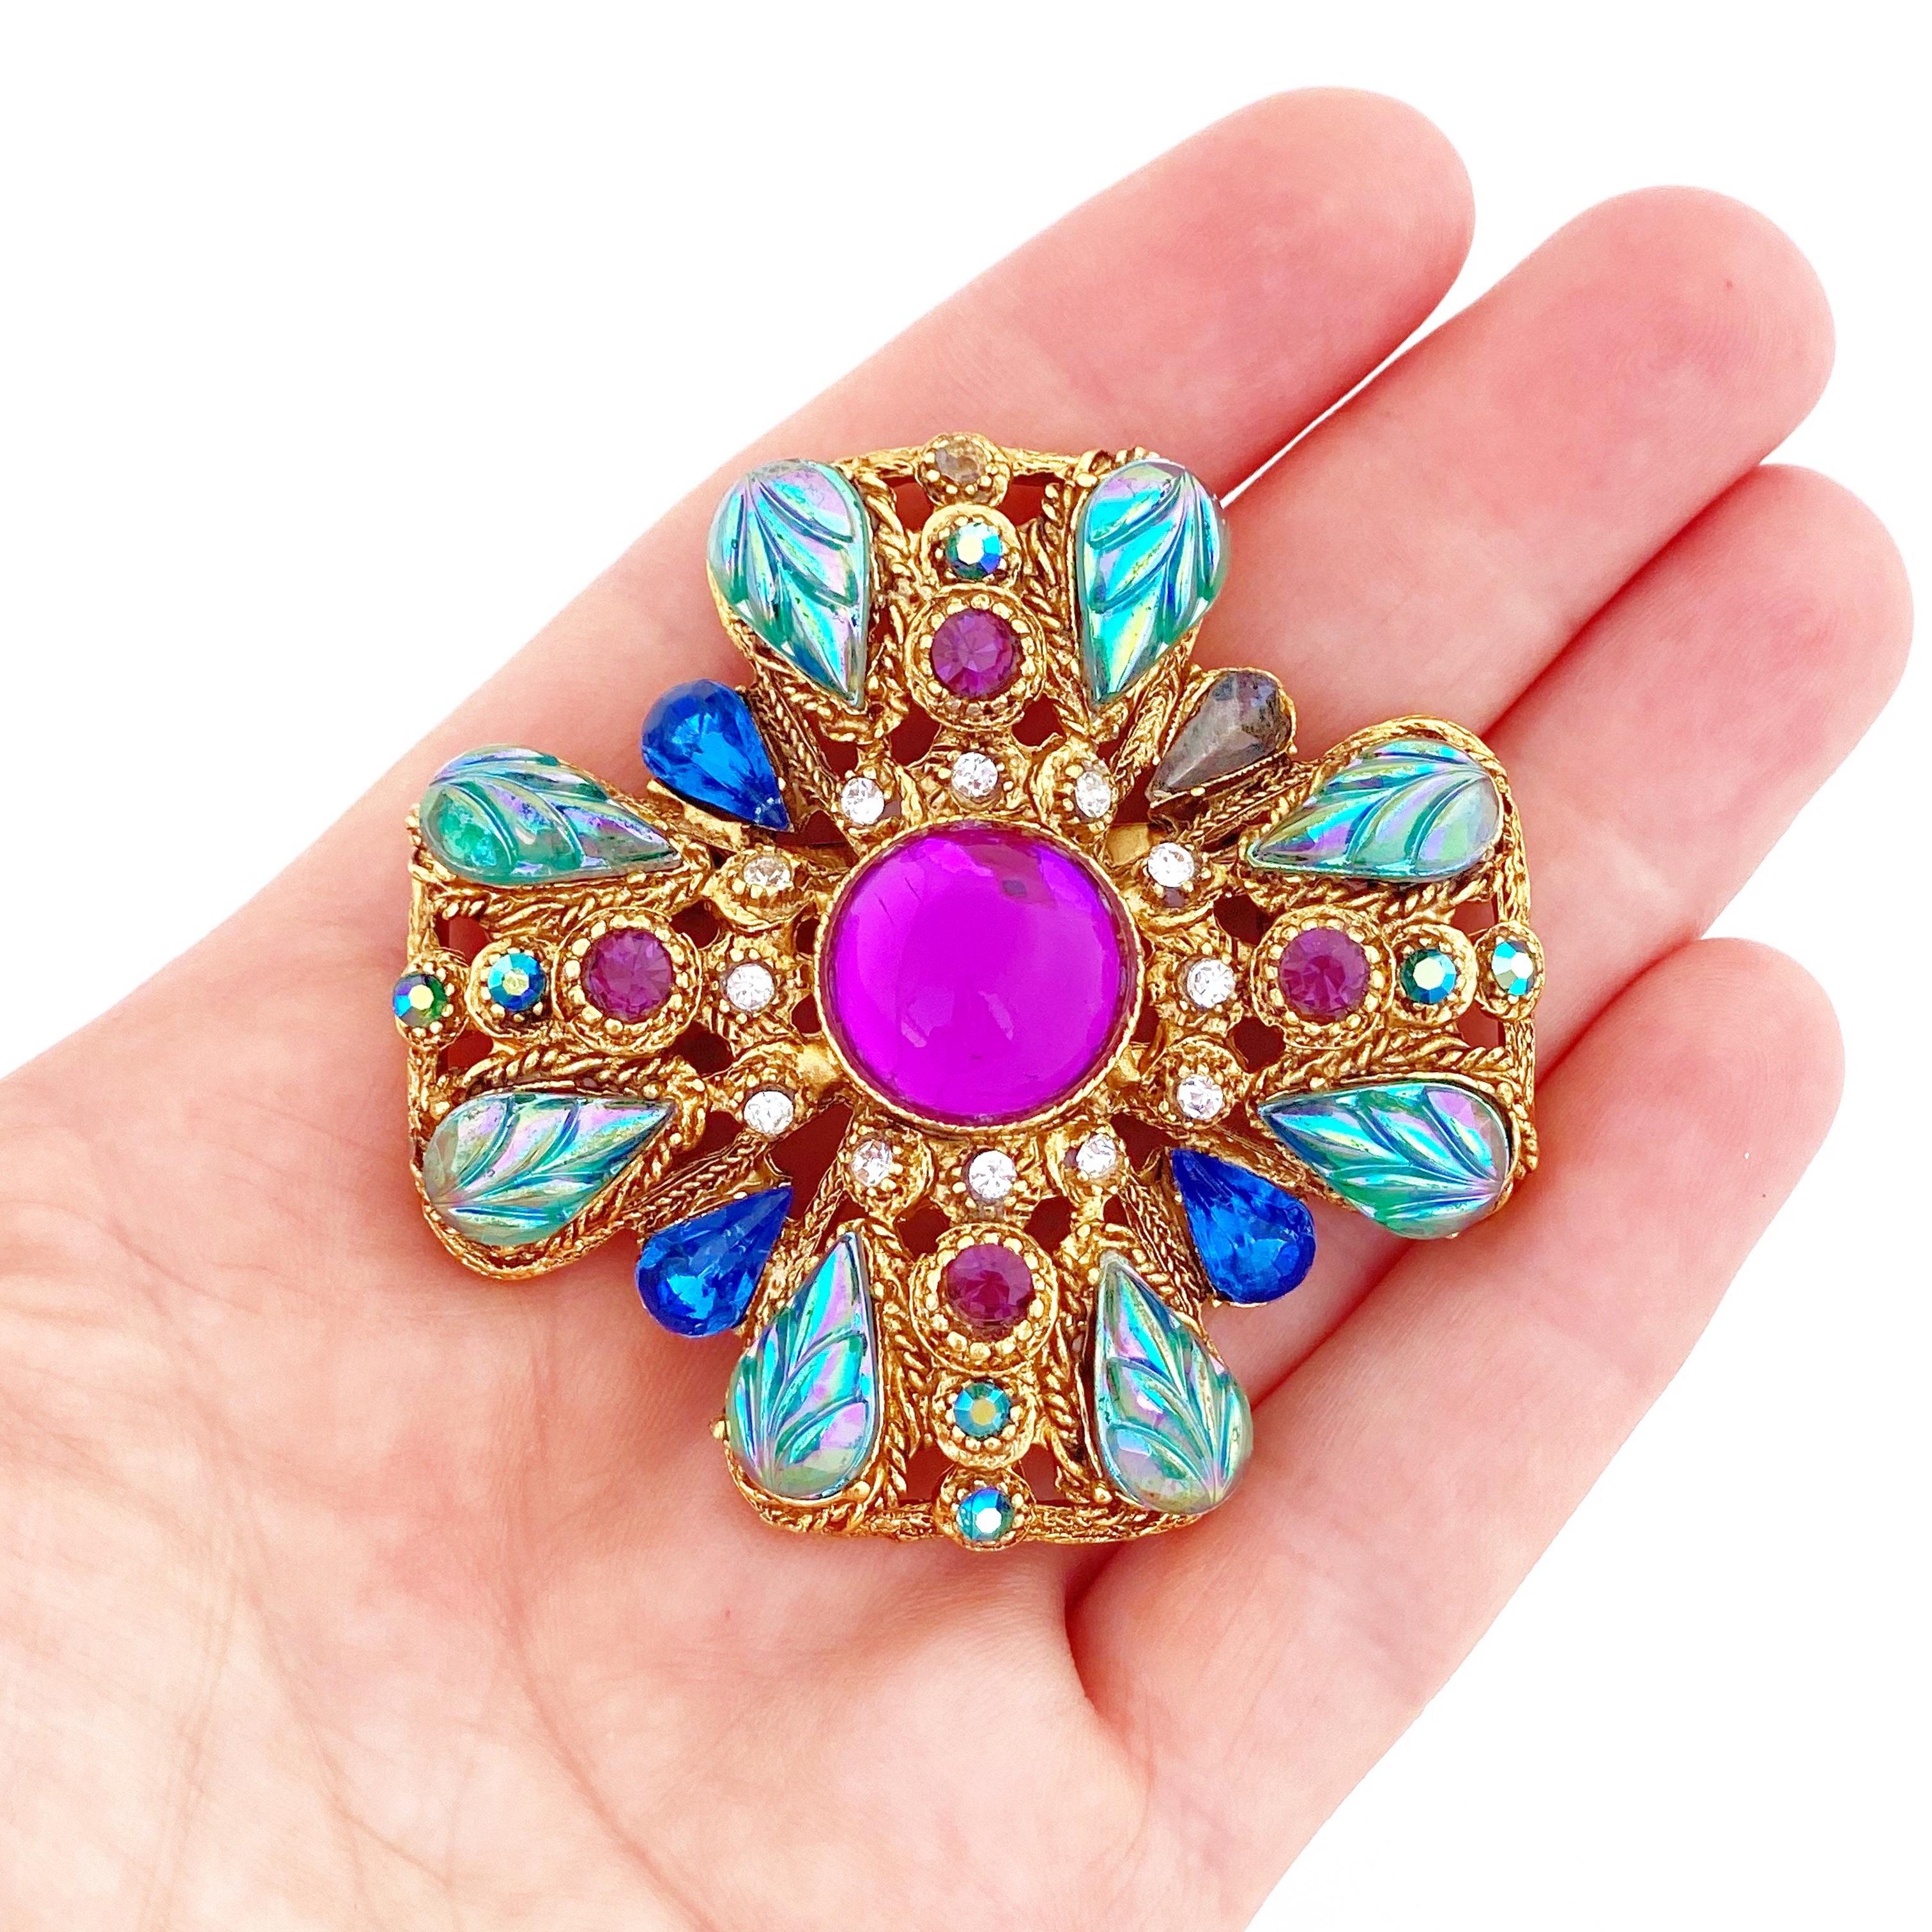 Ornate Maltese Cross Brooch With Molded Glass & Rhinestones By Florenza, 1960s For Sale 1